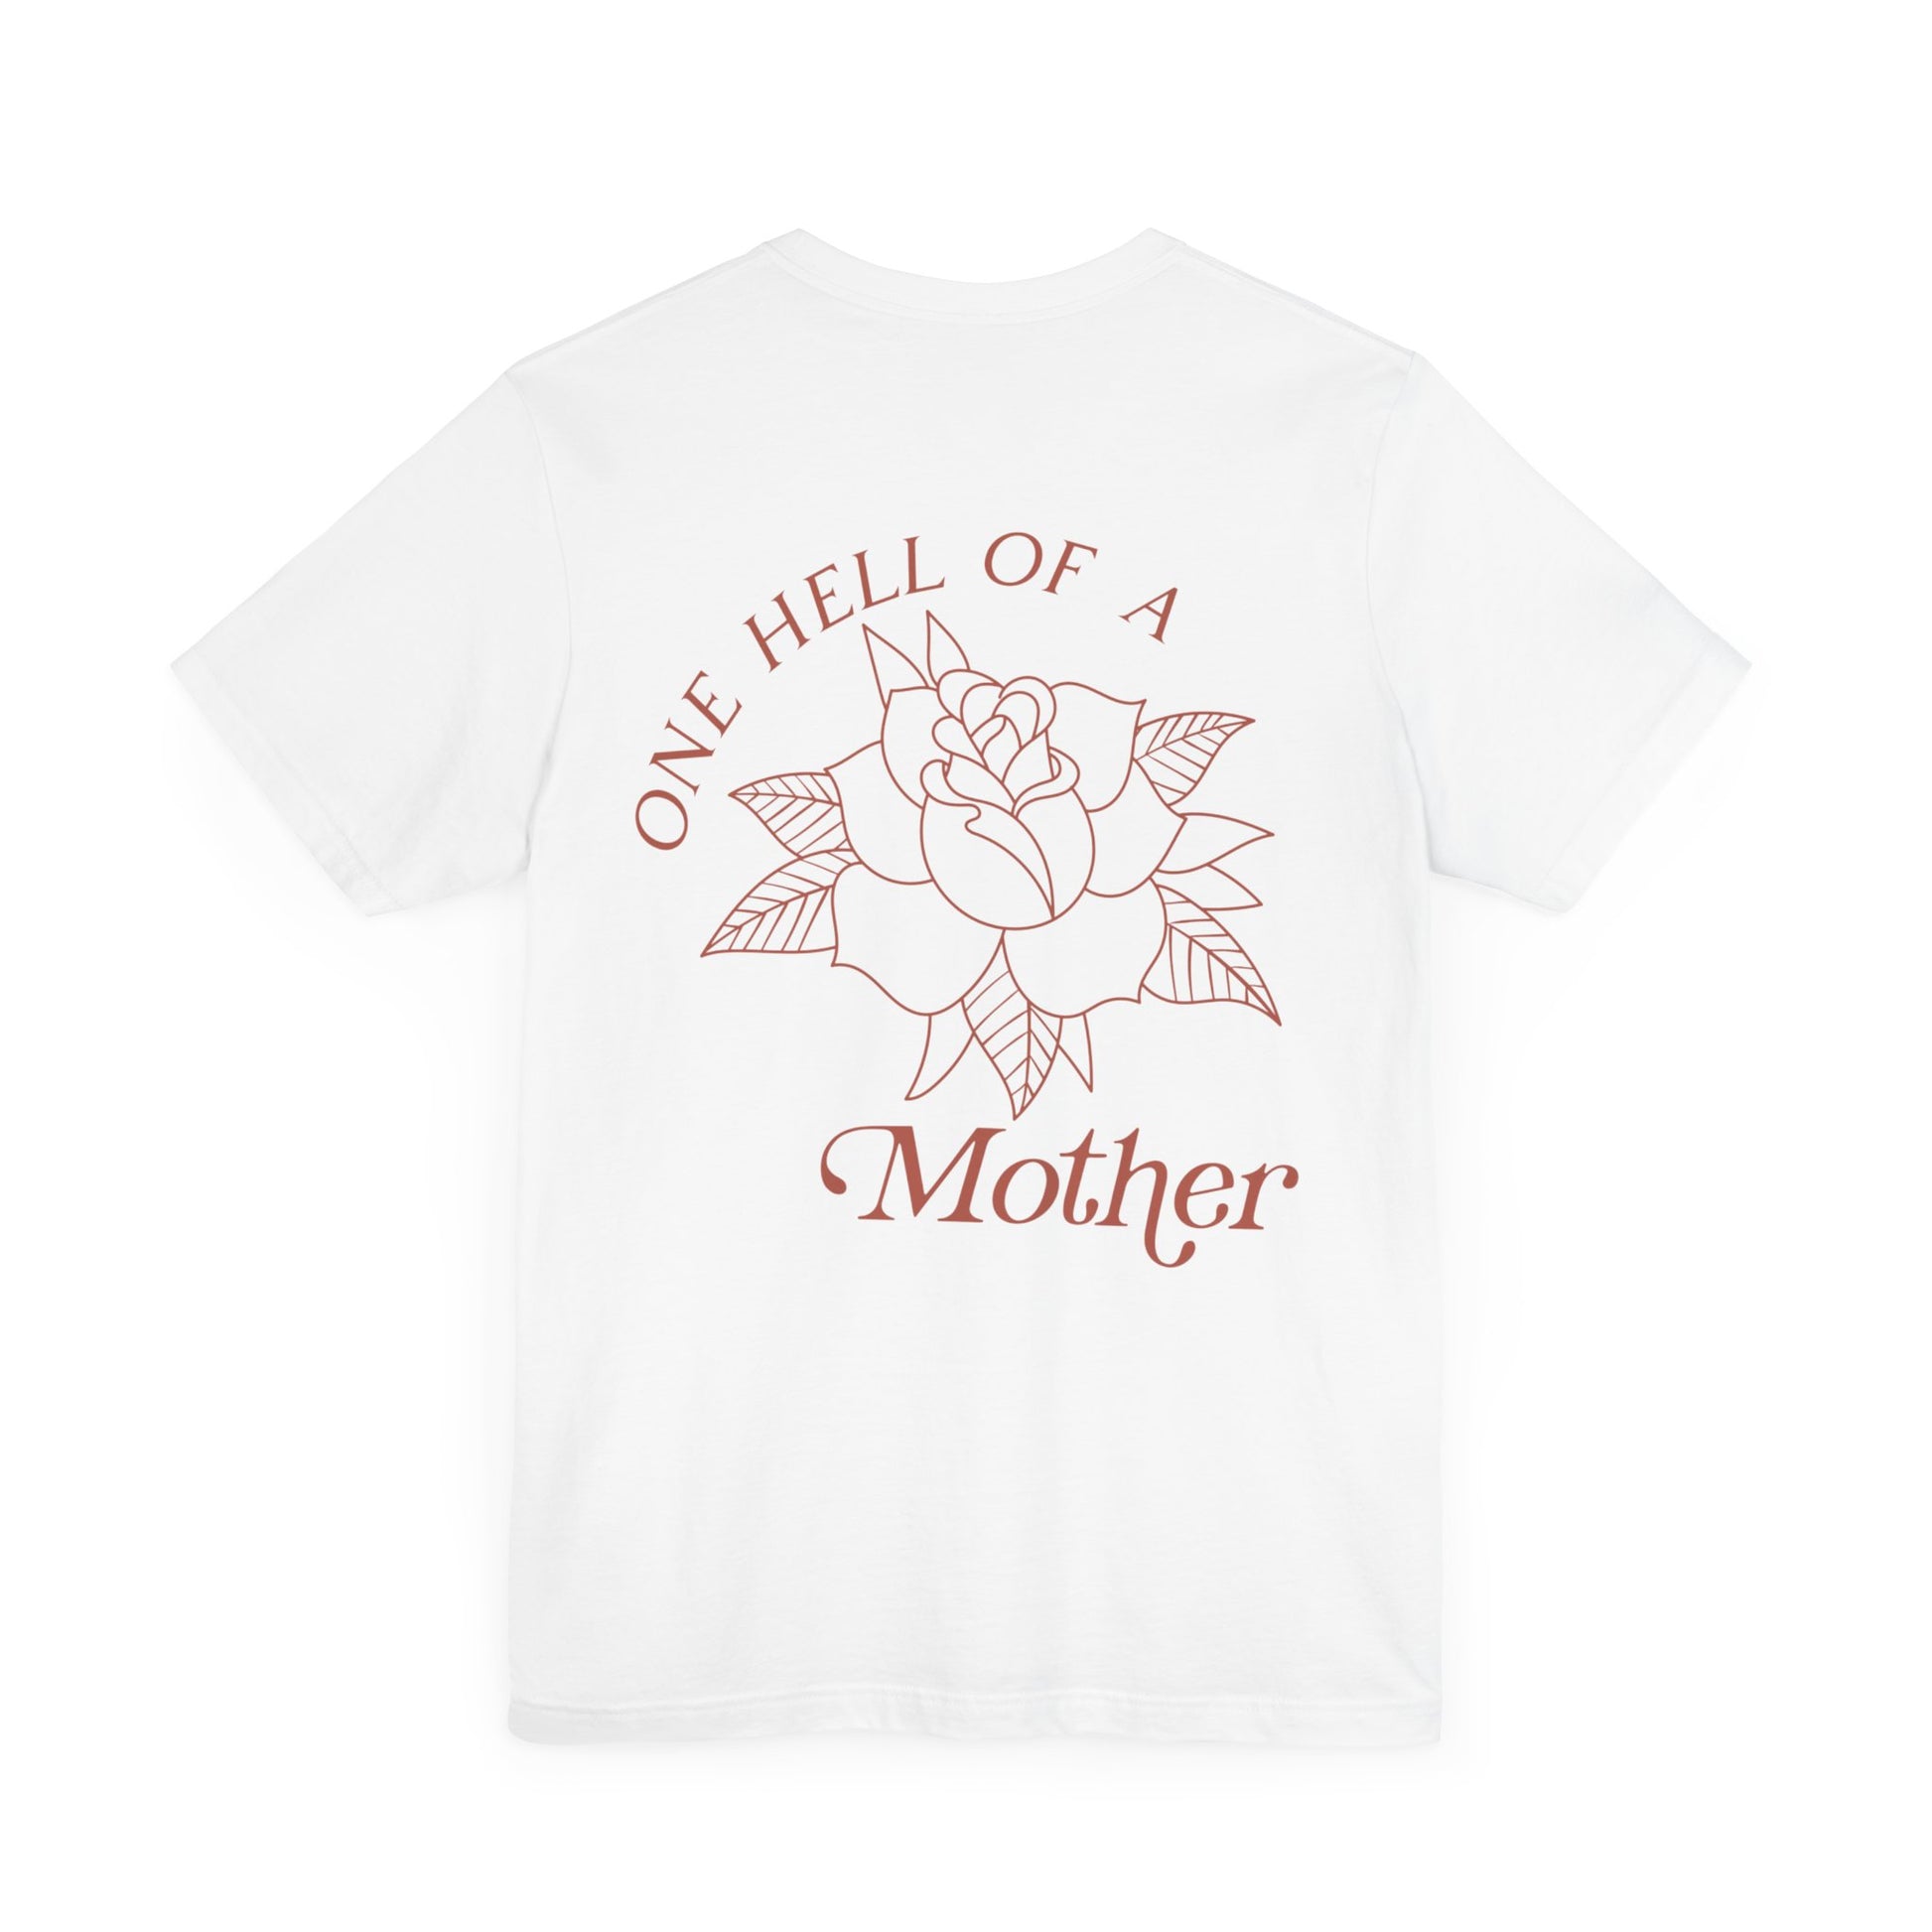 One Hell of a Mother Graphic Tee - Origin Maternity 